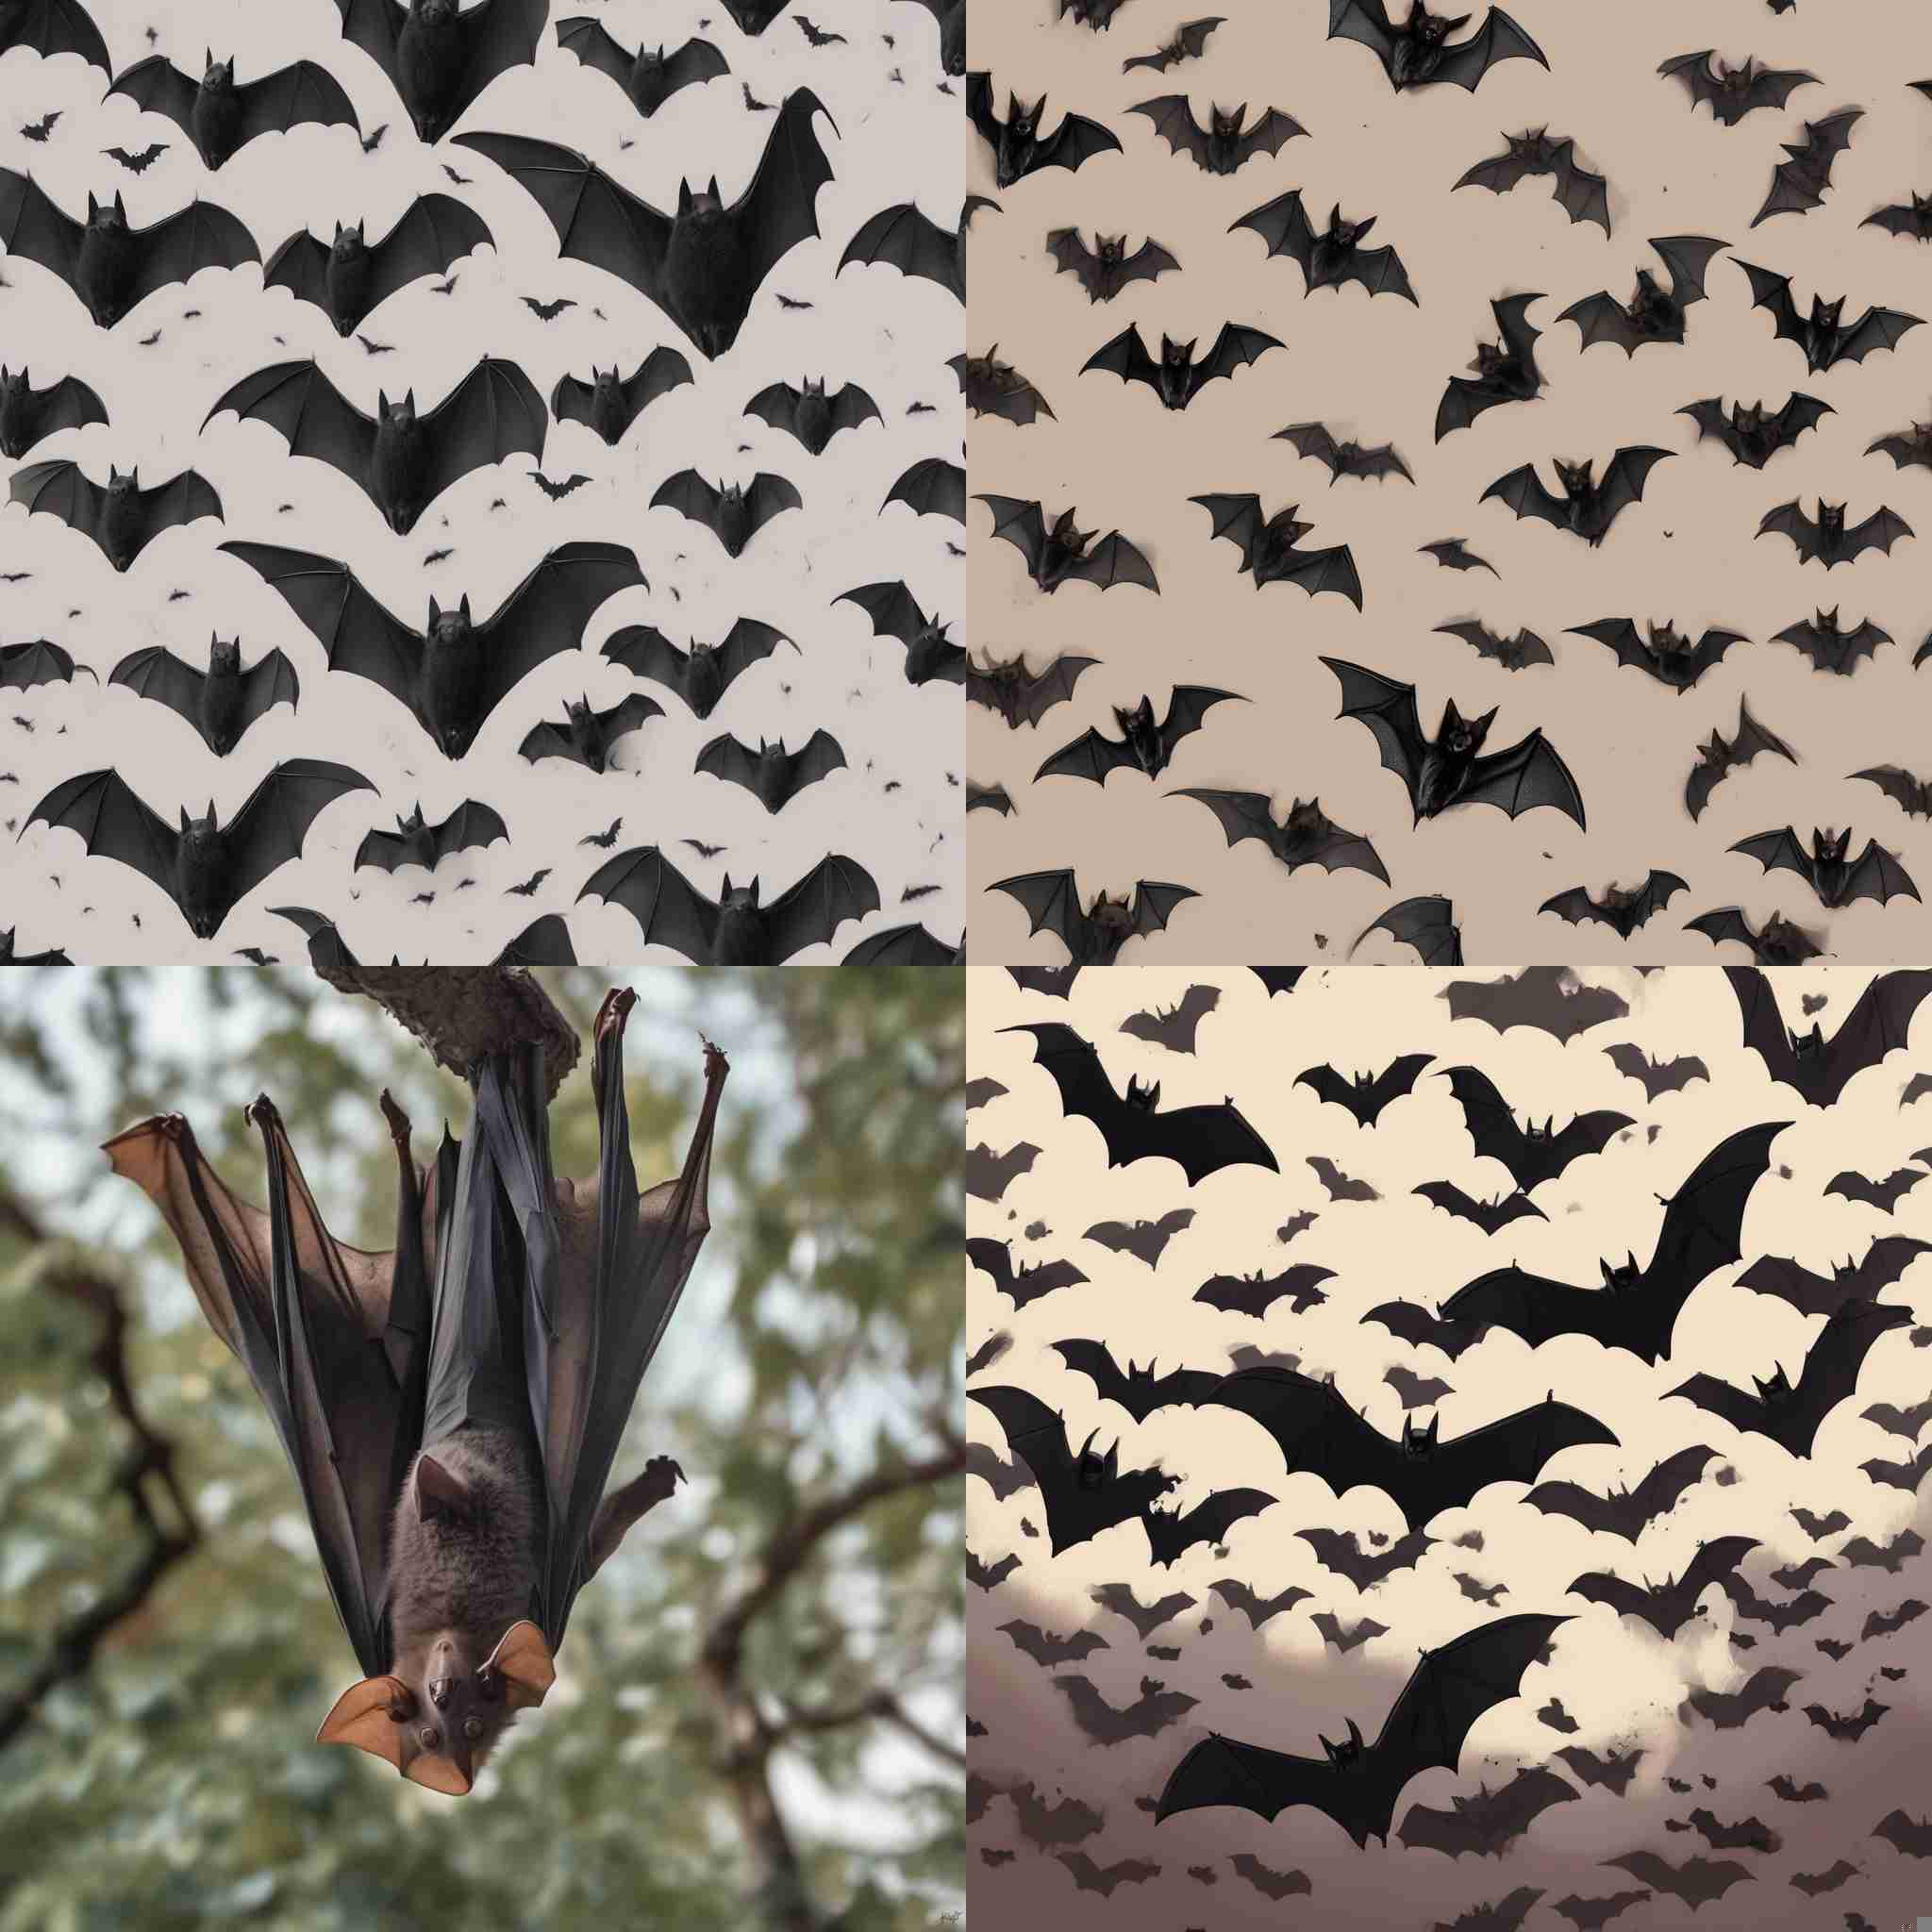 Bats during the day